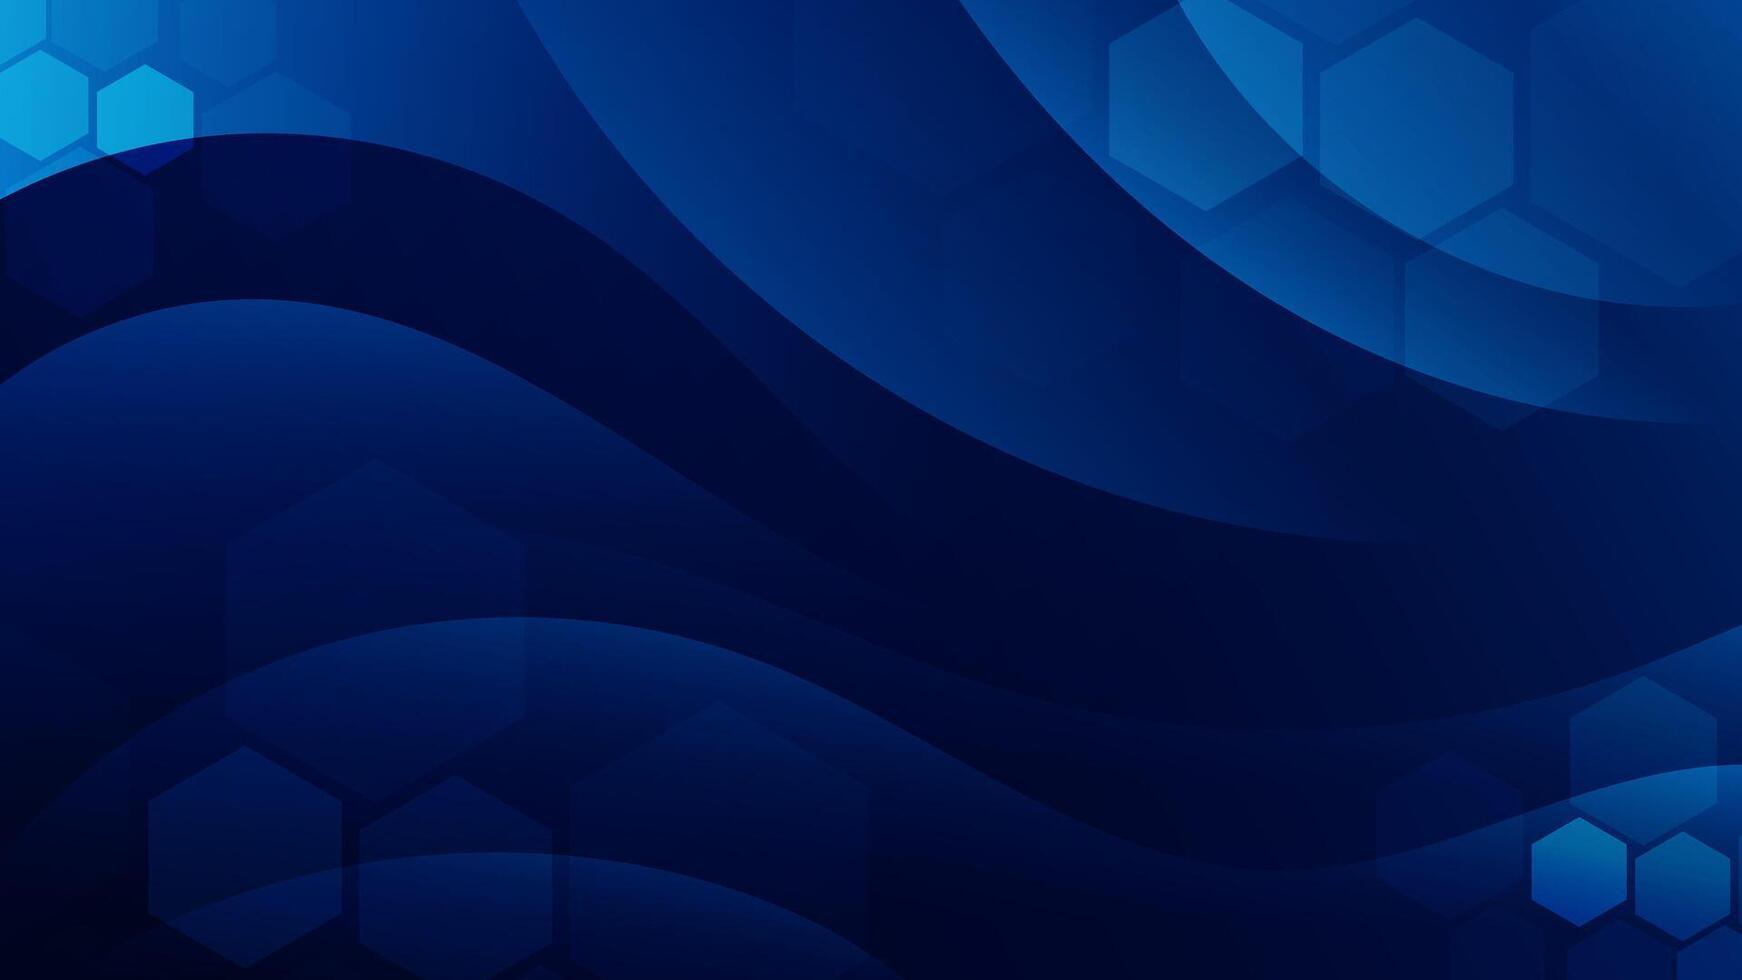 Abstract dark blue Background with Wavy Shapes. flowing and curvy shapes. This asset is suitable for website backgrounds, flyers, posters, and digital art projects. vector